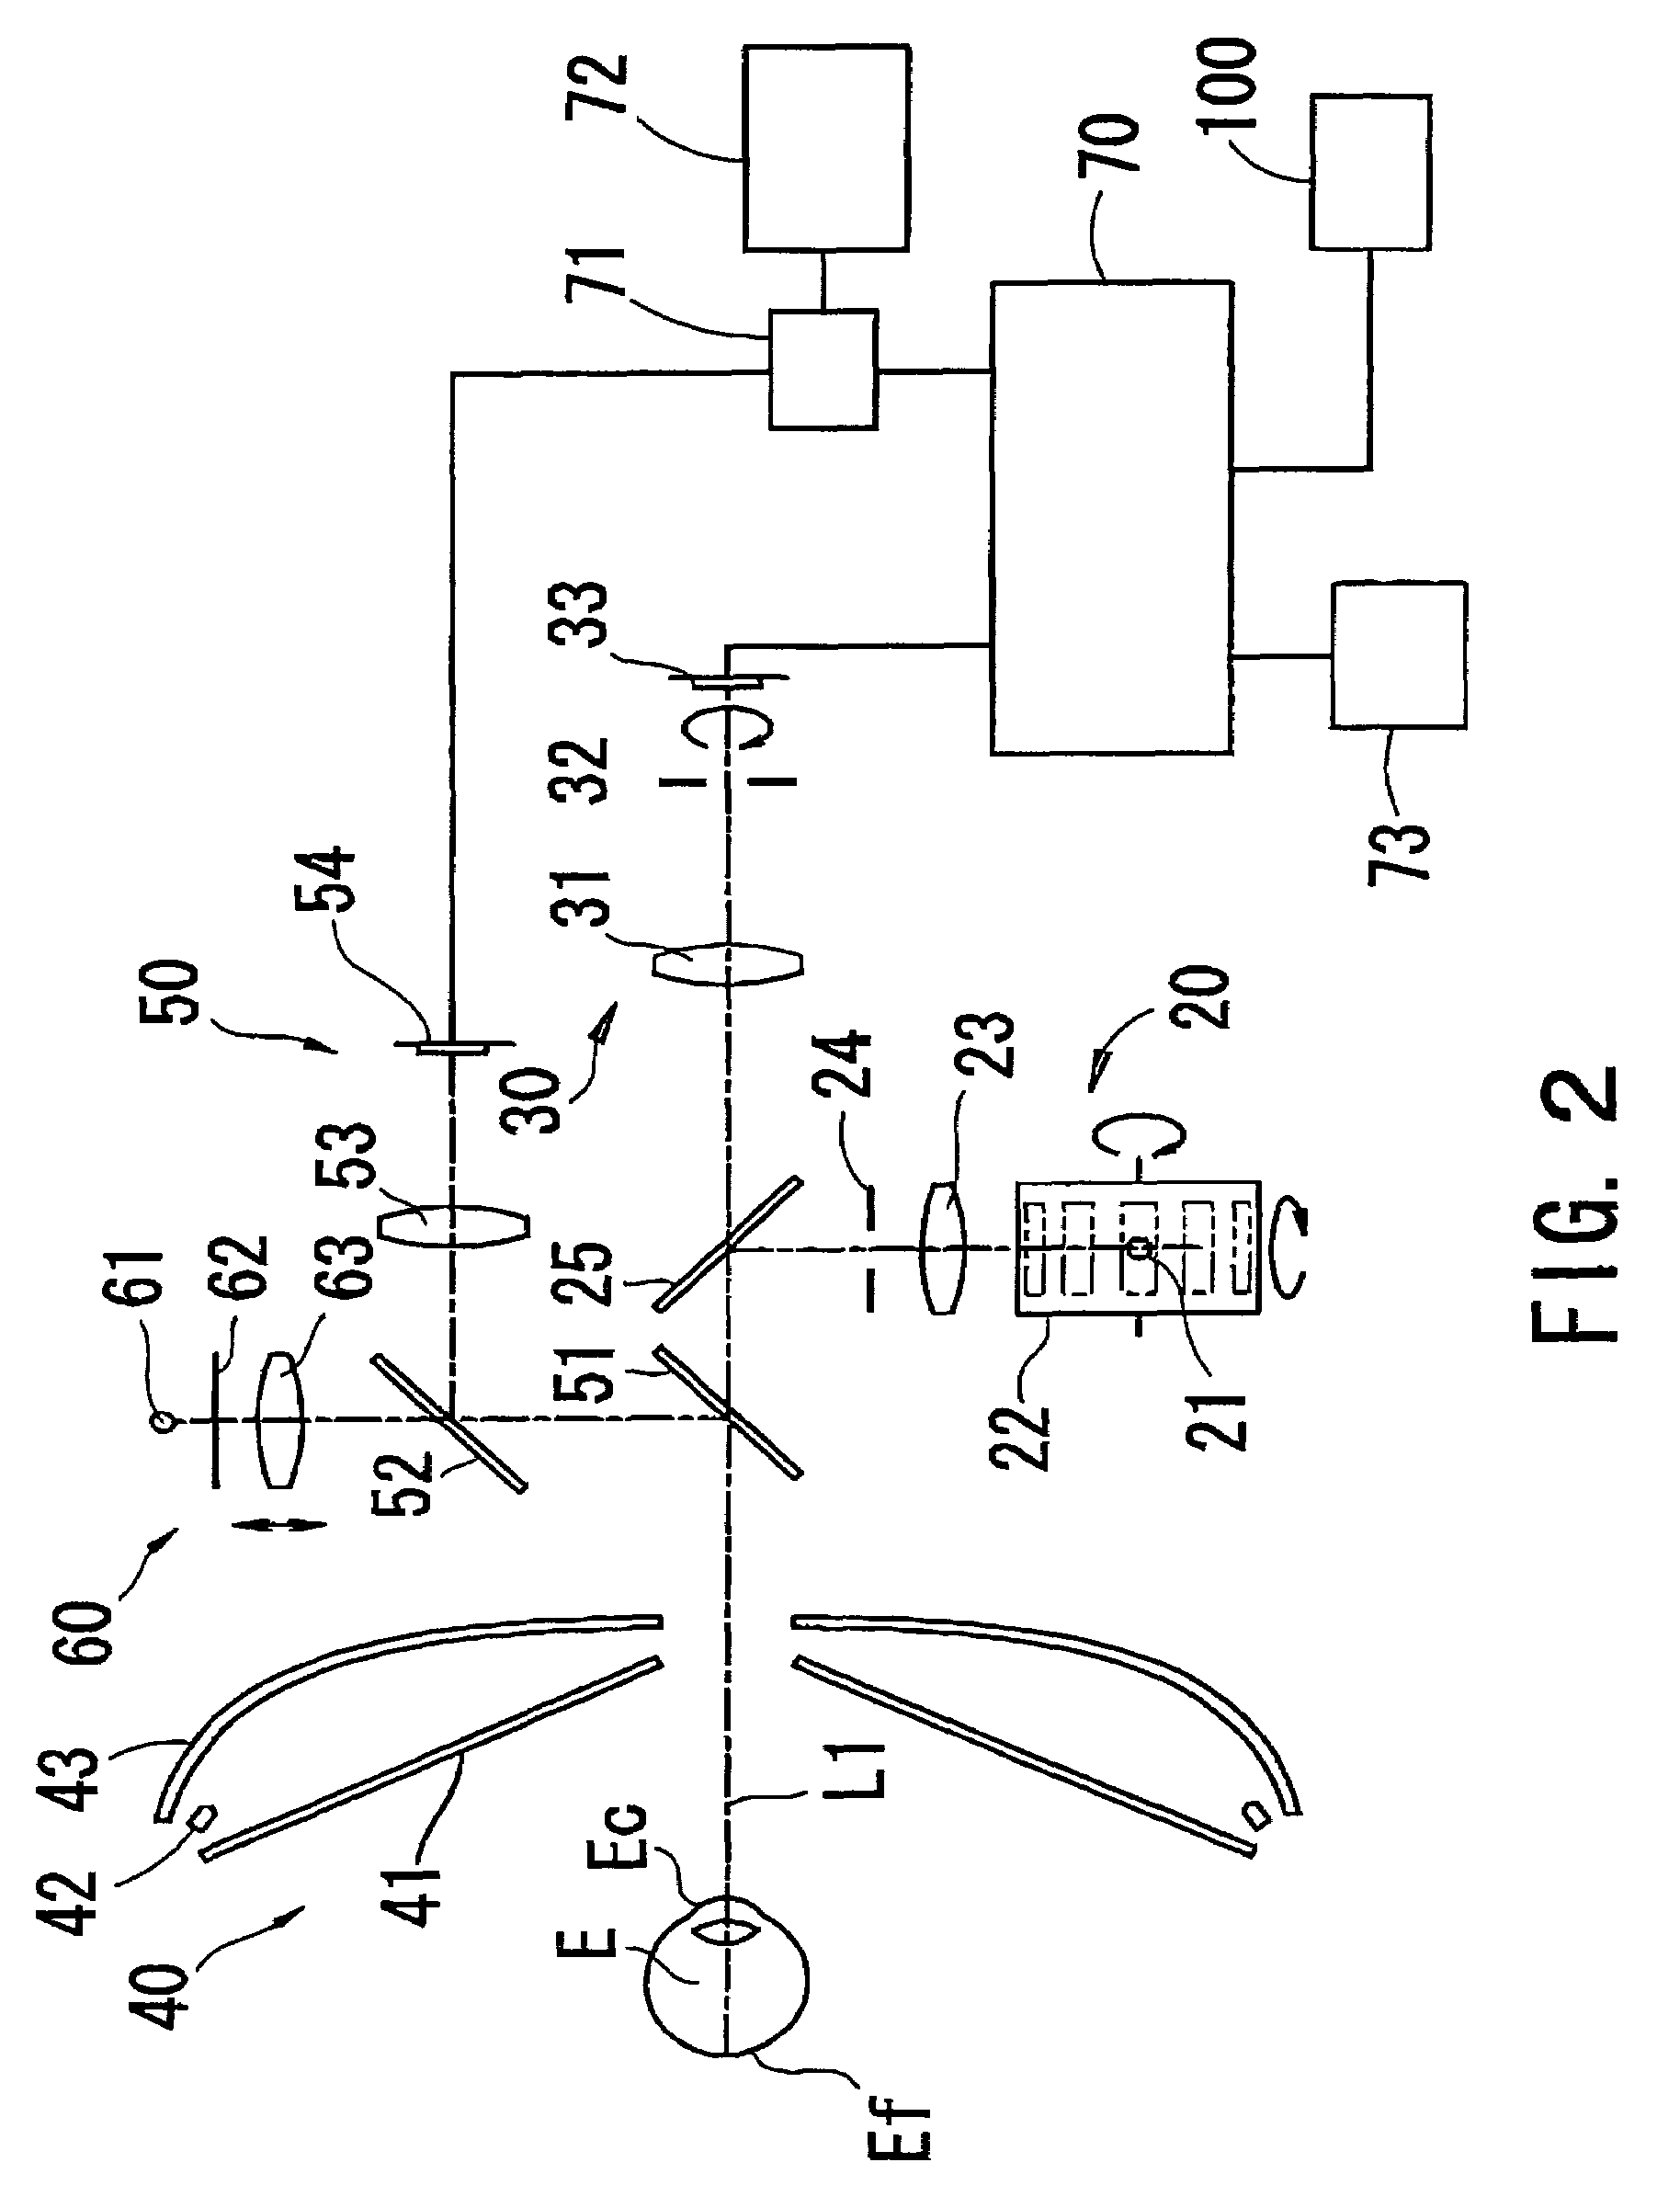 Ophthalmic apparatus and a method for calculating internal eye refractive power distribution